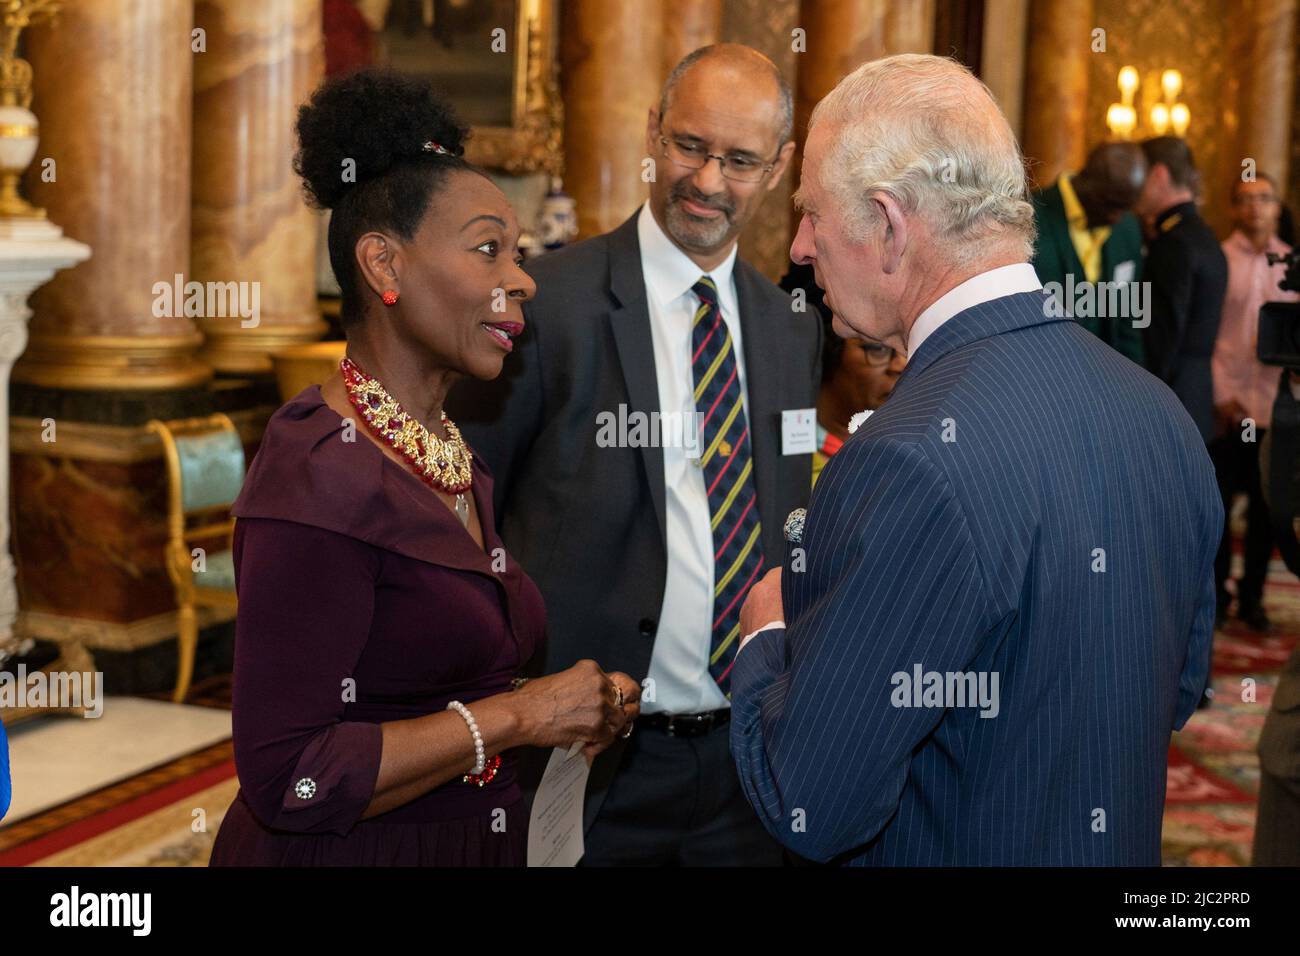 Britain's Prince Charles speaks with actress, author and politician Floella Benjamin, while he attends a reception celebrating the Commonwealth Diaspora of the United Kingdom, in London, Britain, June 9, 2022. Dominic Lipinski/PA Wire/Pool via REUTERS Stock Photo